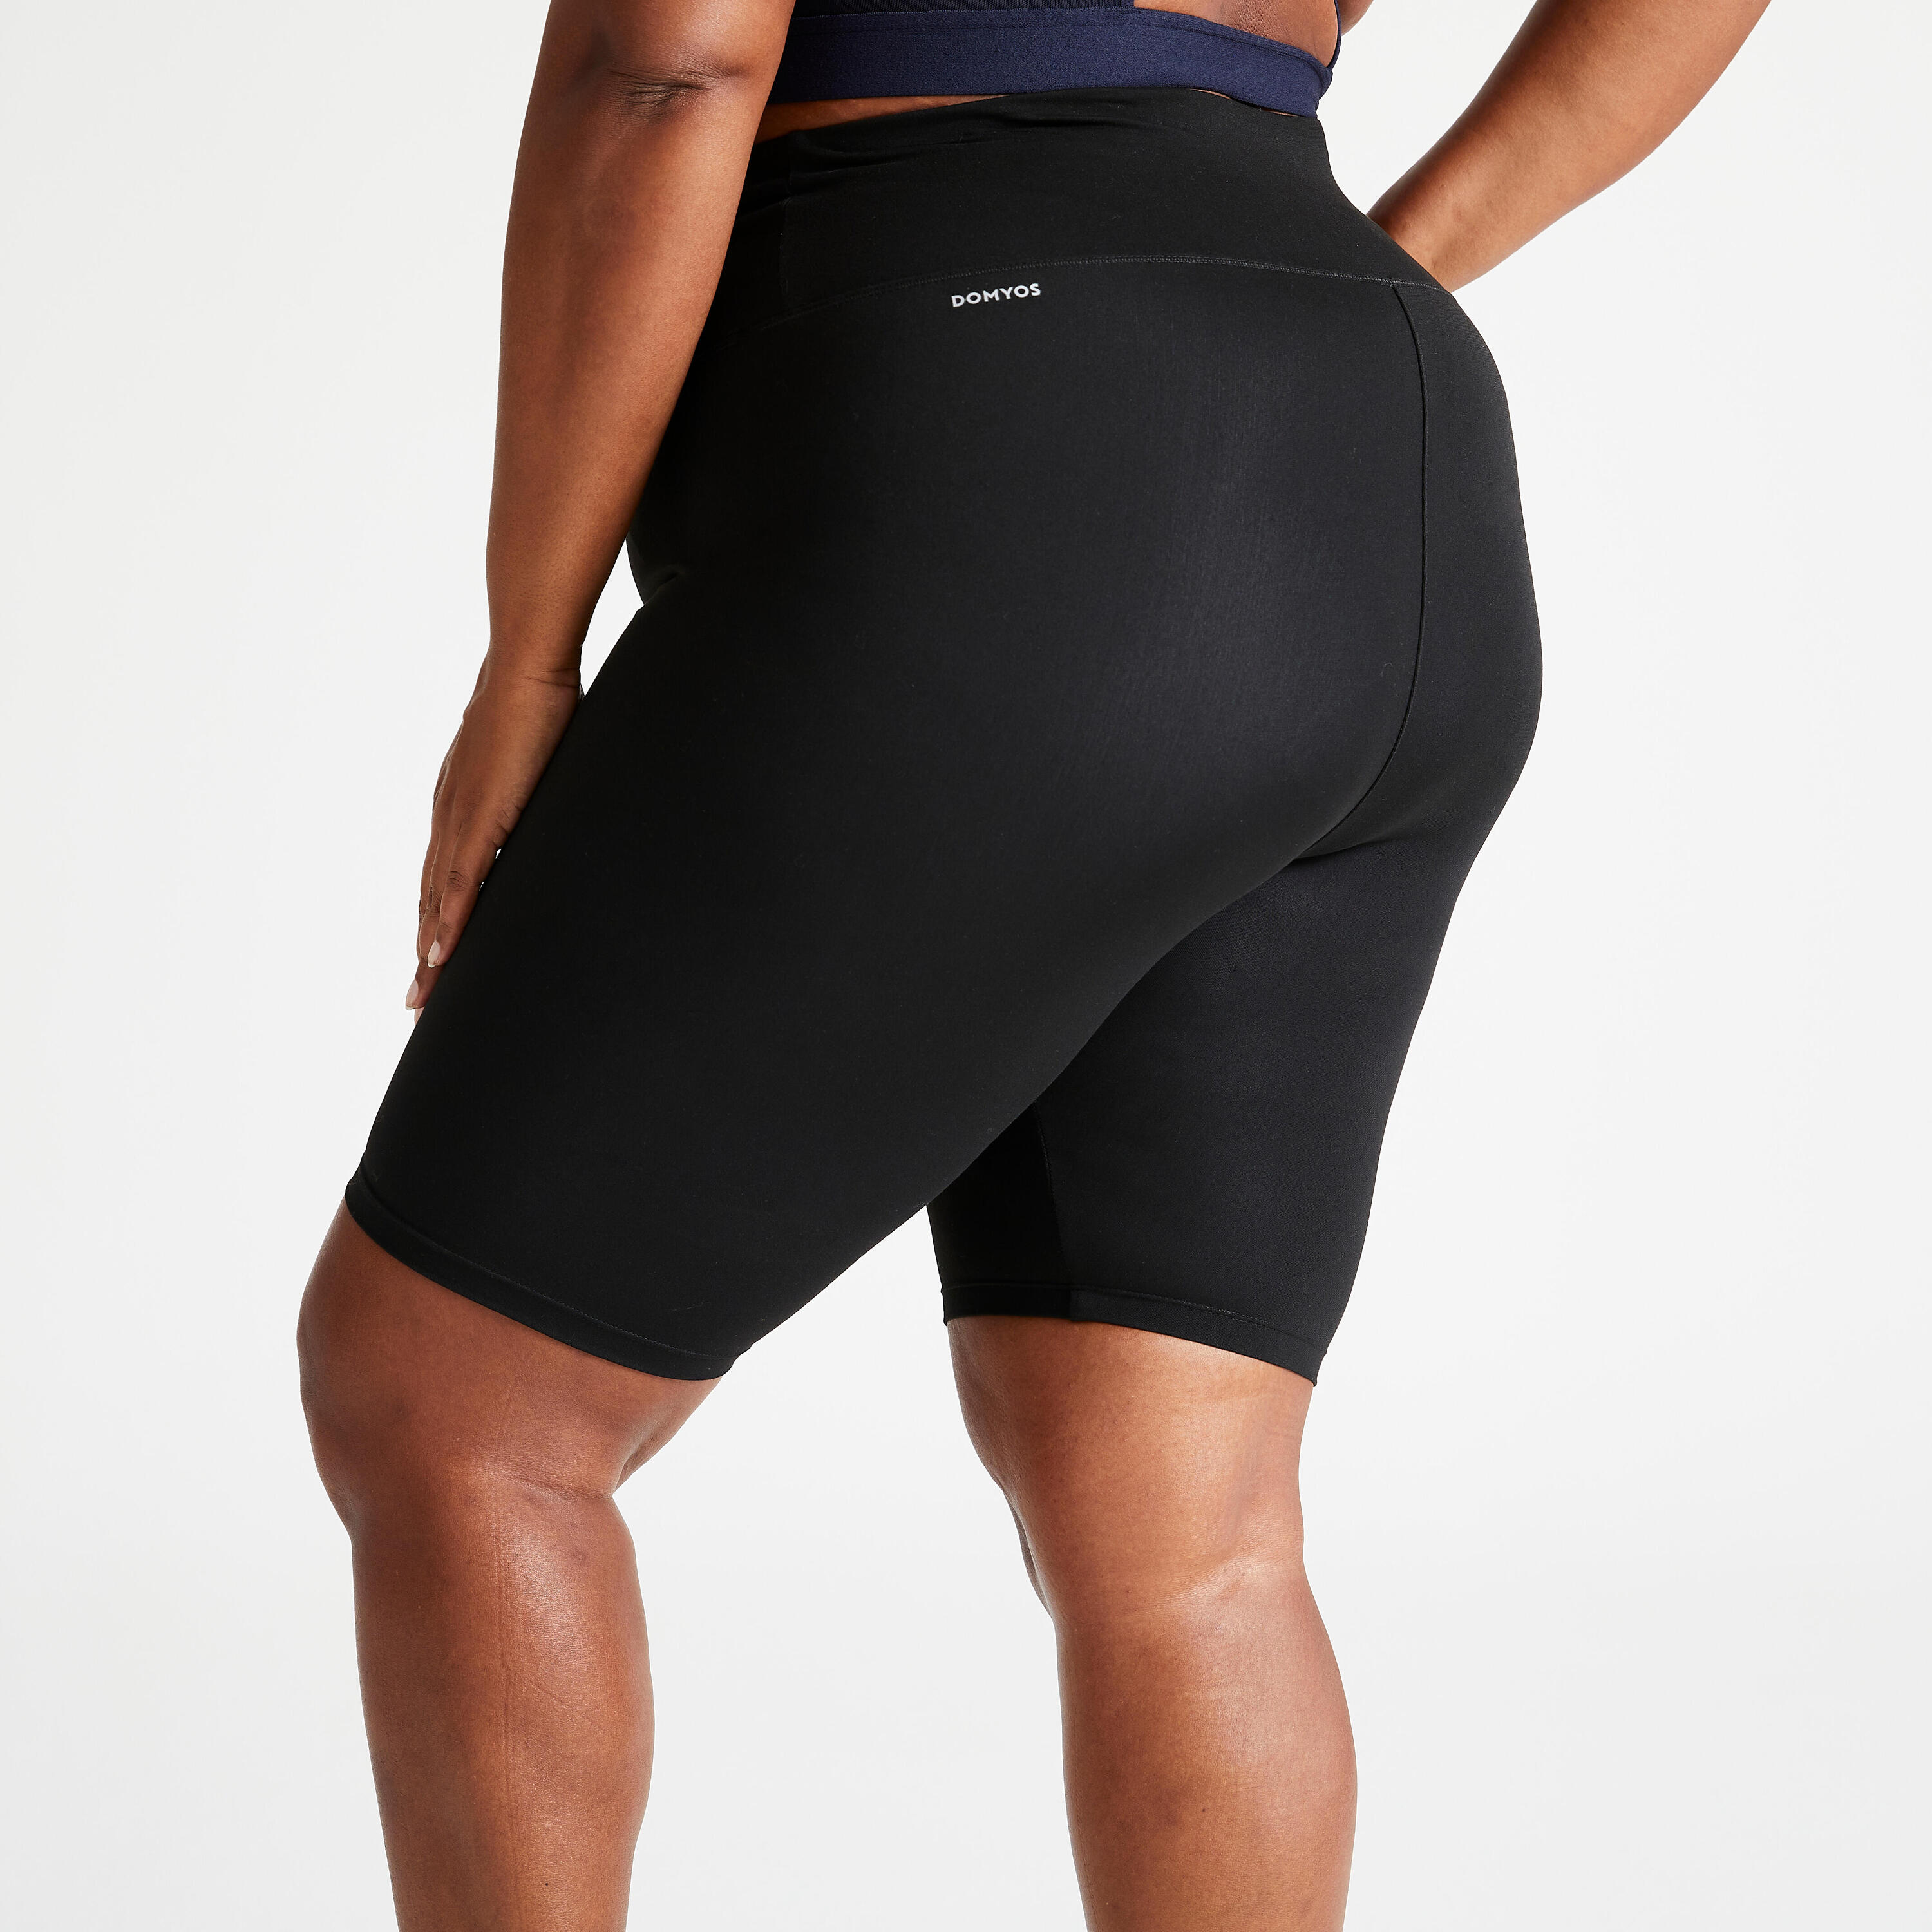 High-Waisted Plus Size Fitness Cycling Shorts - Black 4/4